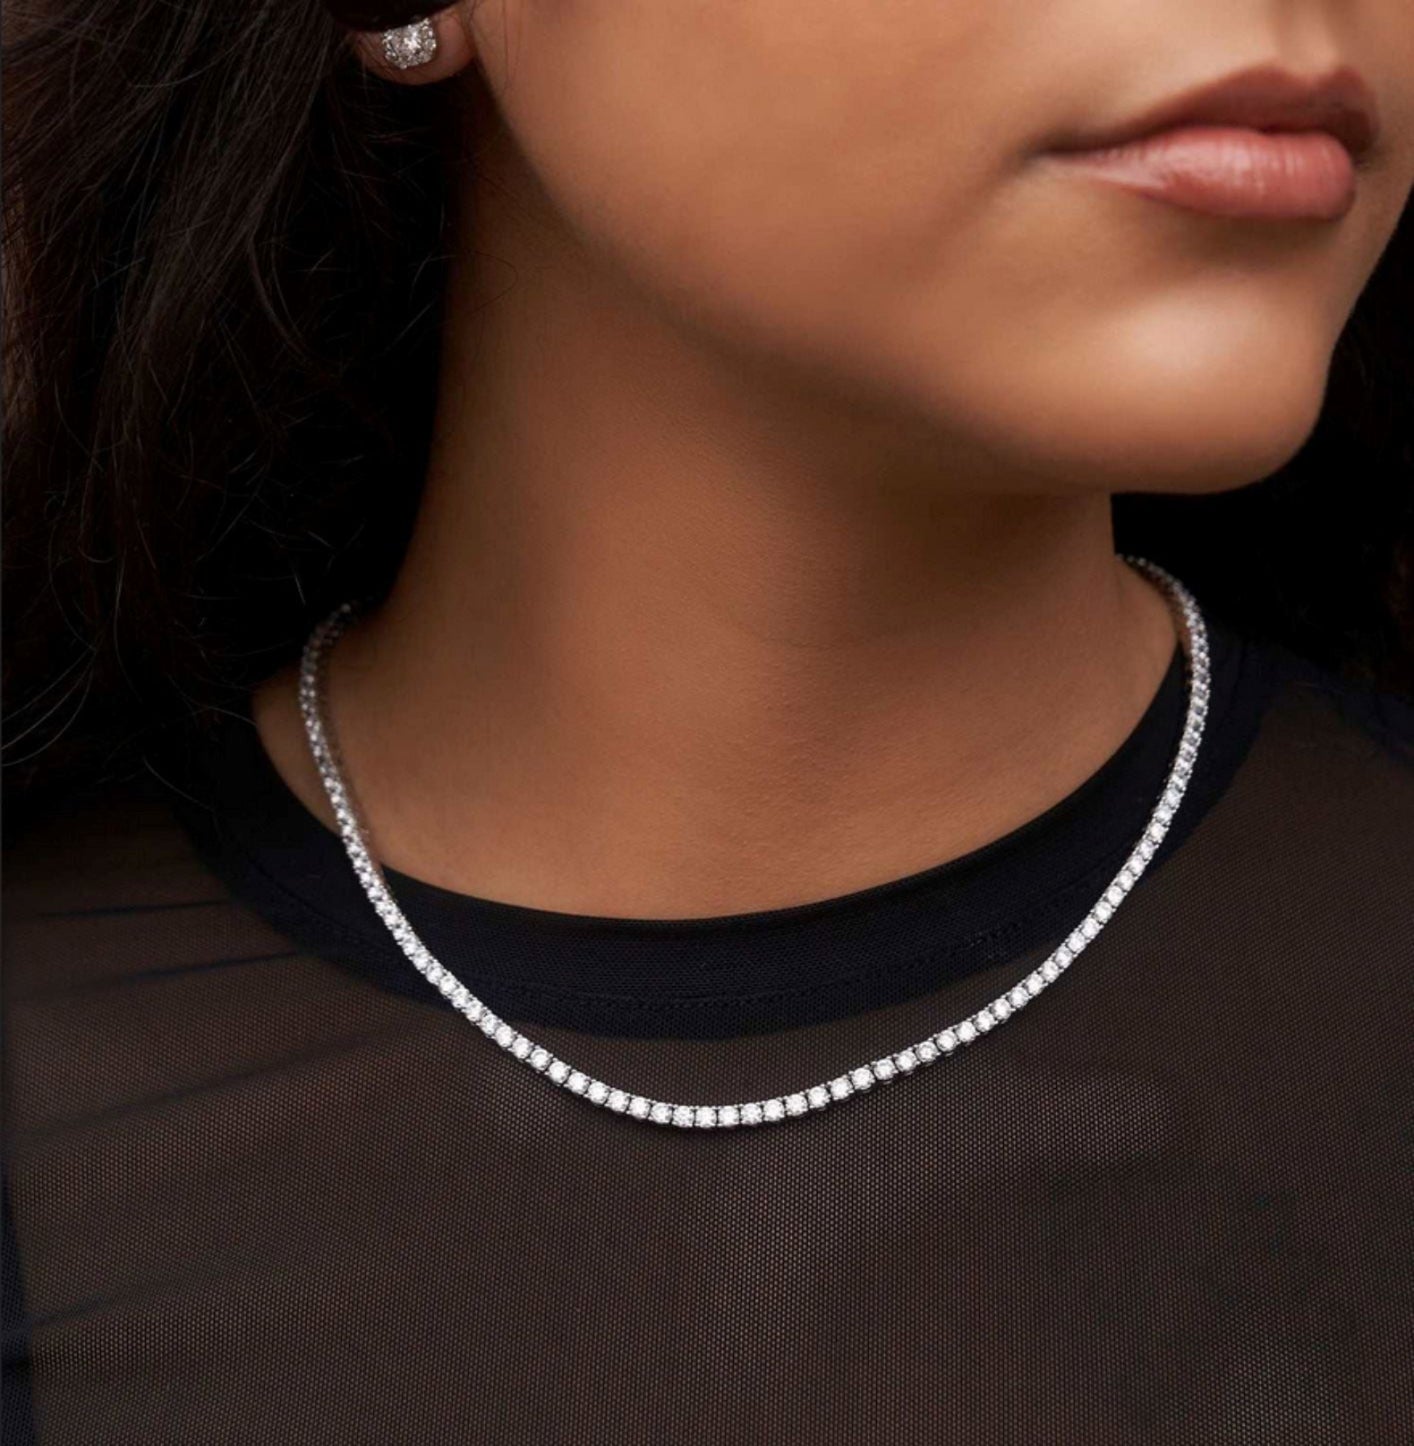 TENNIS NECKLACE - SILVER ring Yubama Jewelry Online Store - The Elegant Designs of Gold and Silver ! 46cm 